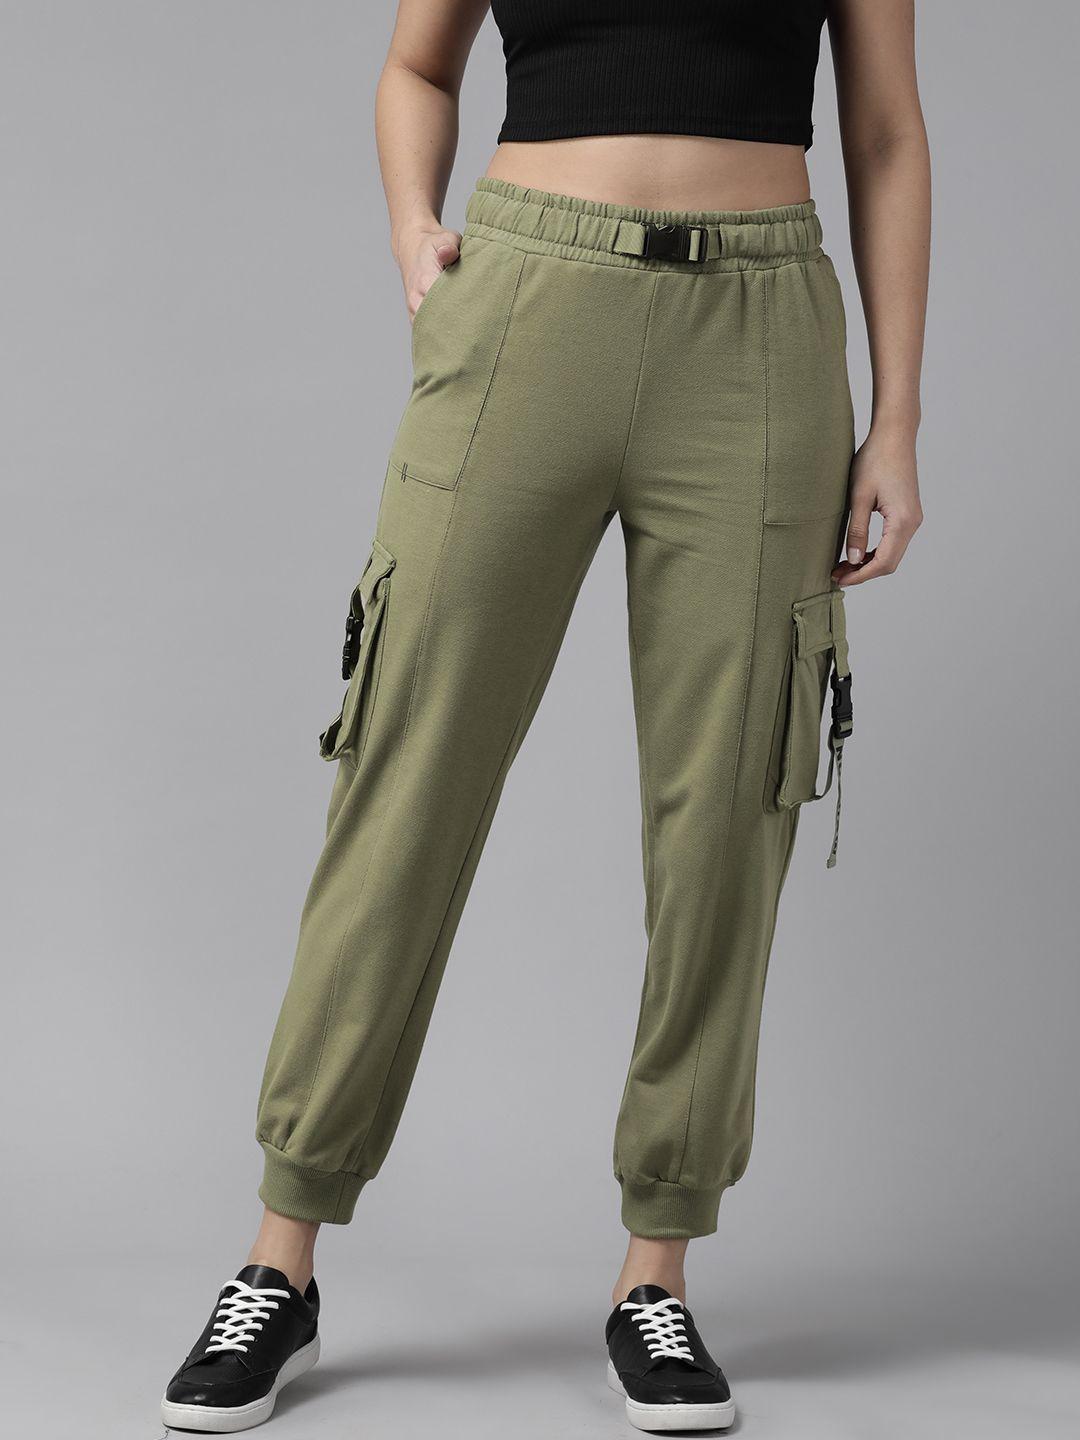 the roadster lifestyle co. women high waist cargo joggers